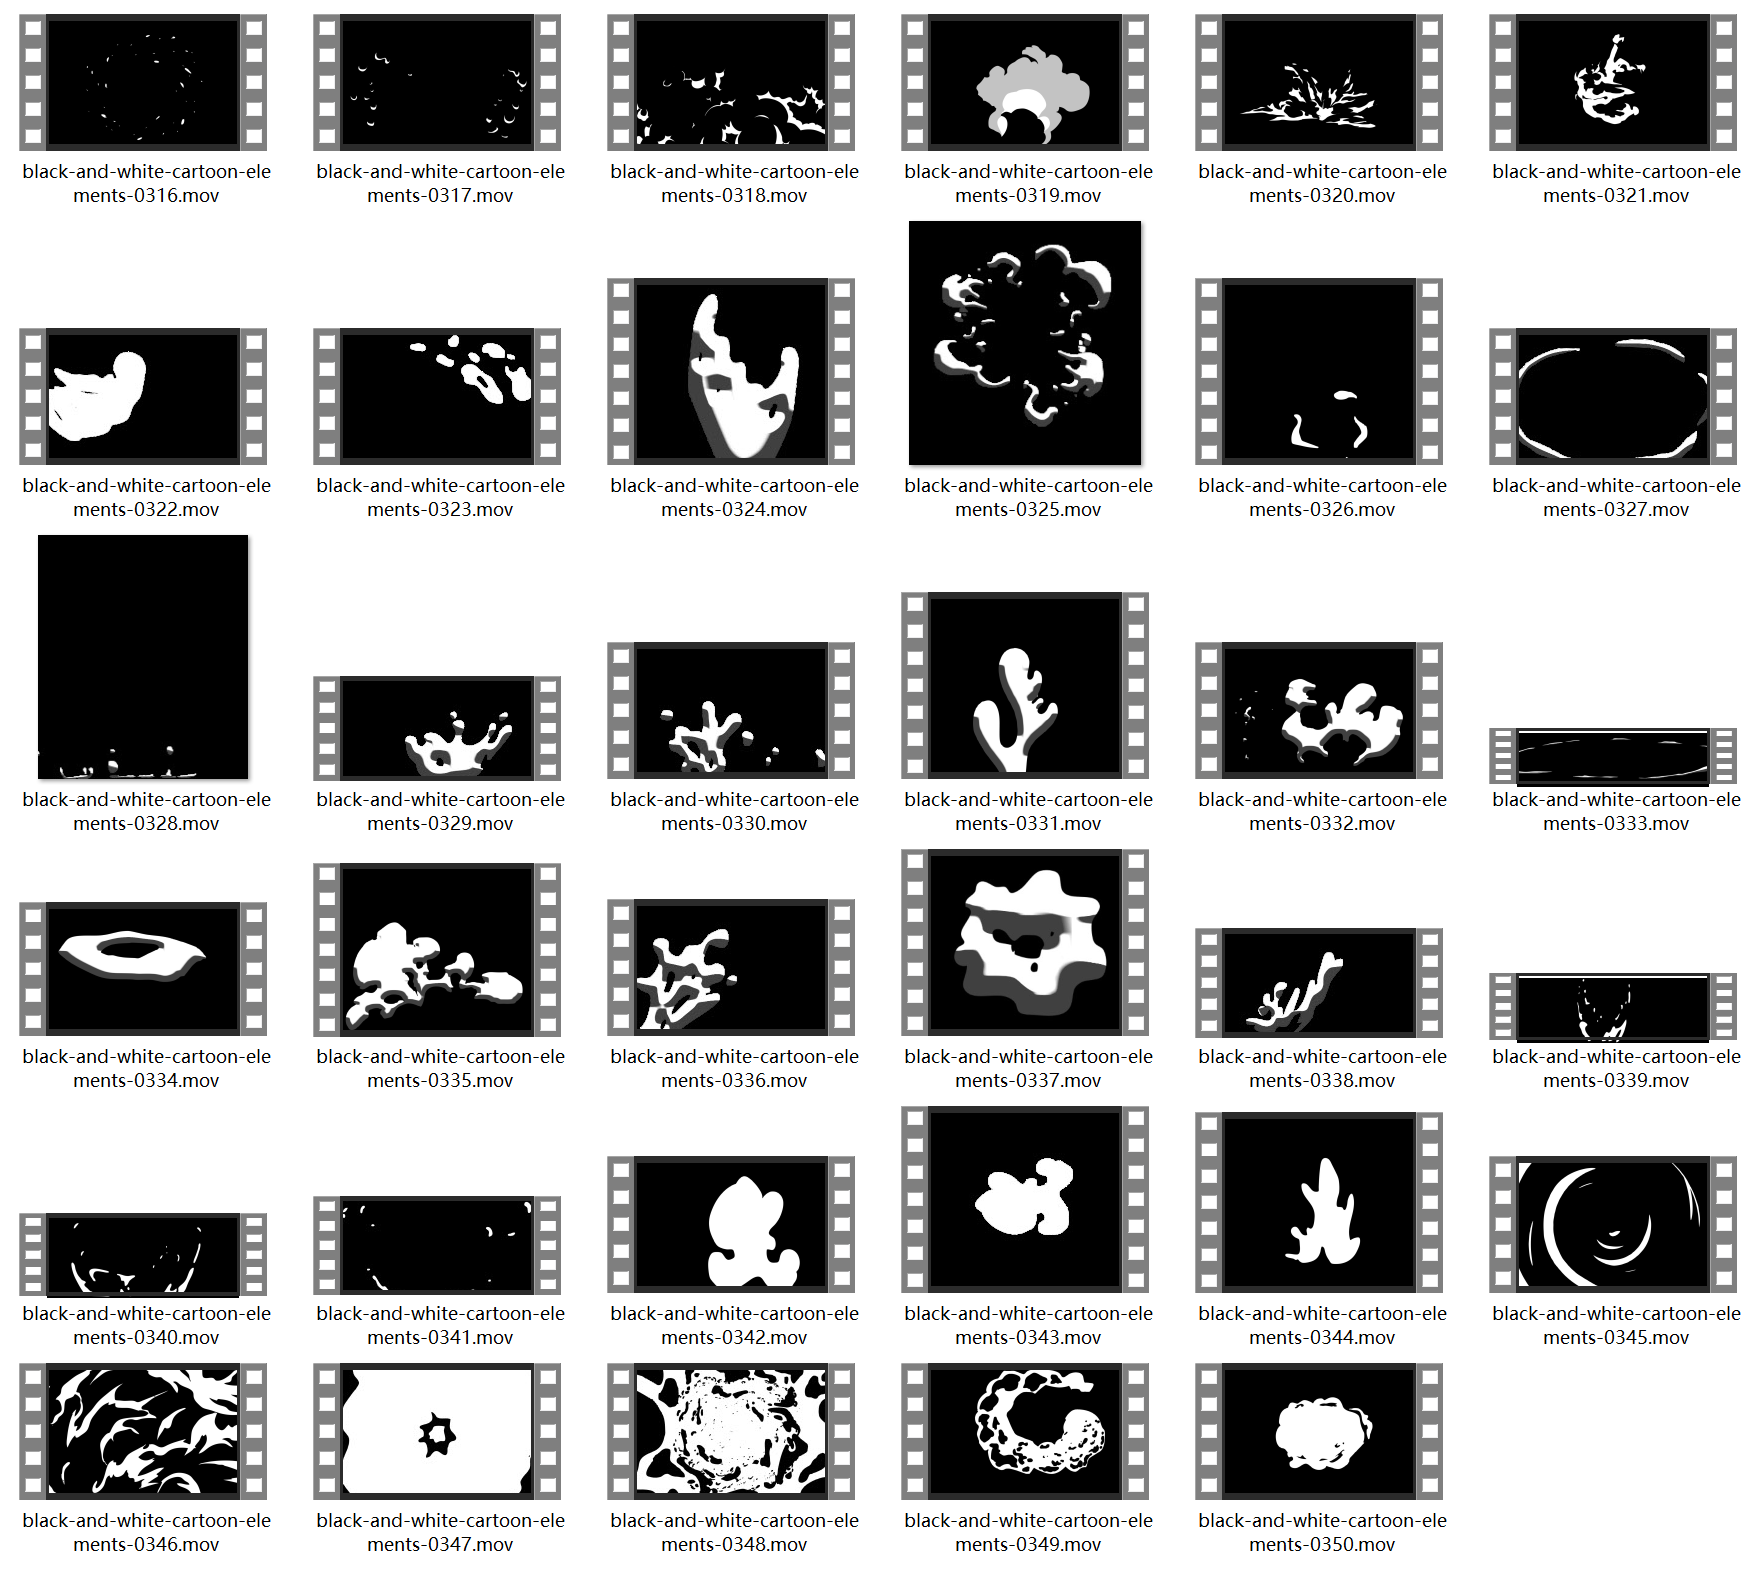 black and white cartoon elements-s0220010a1